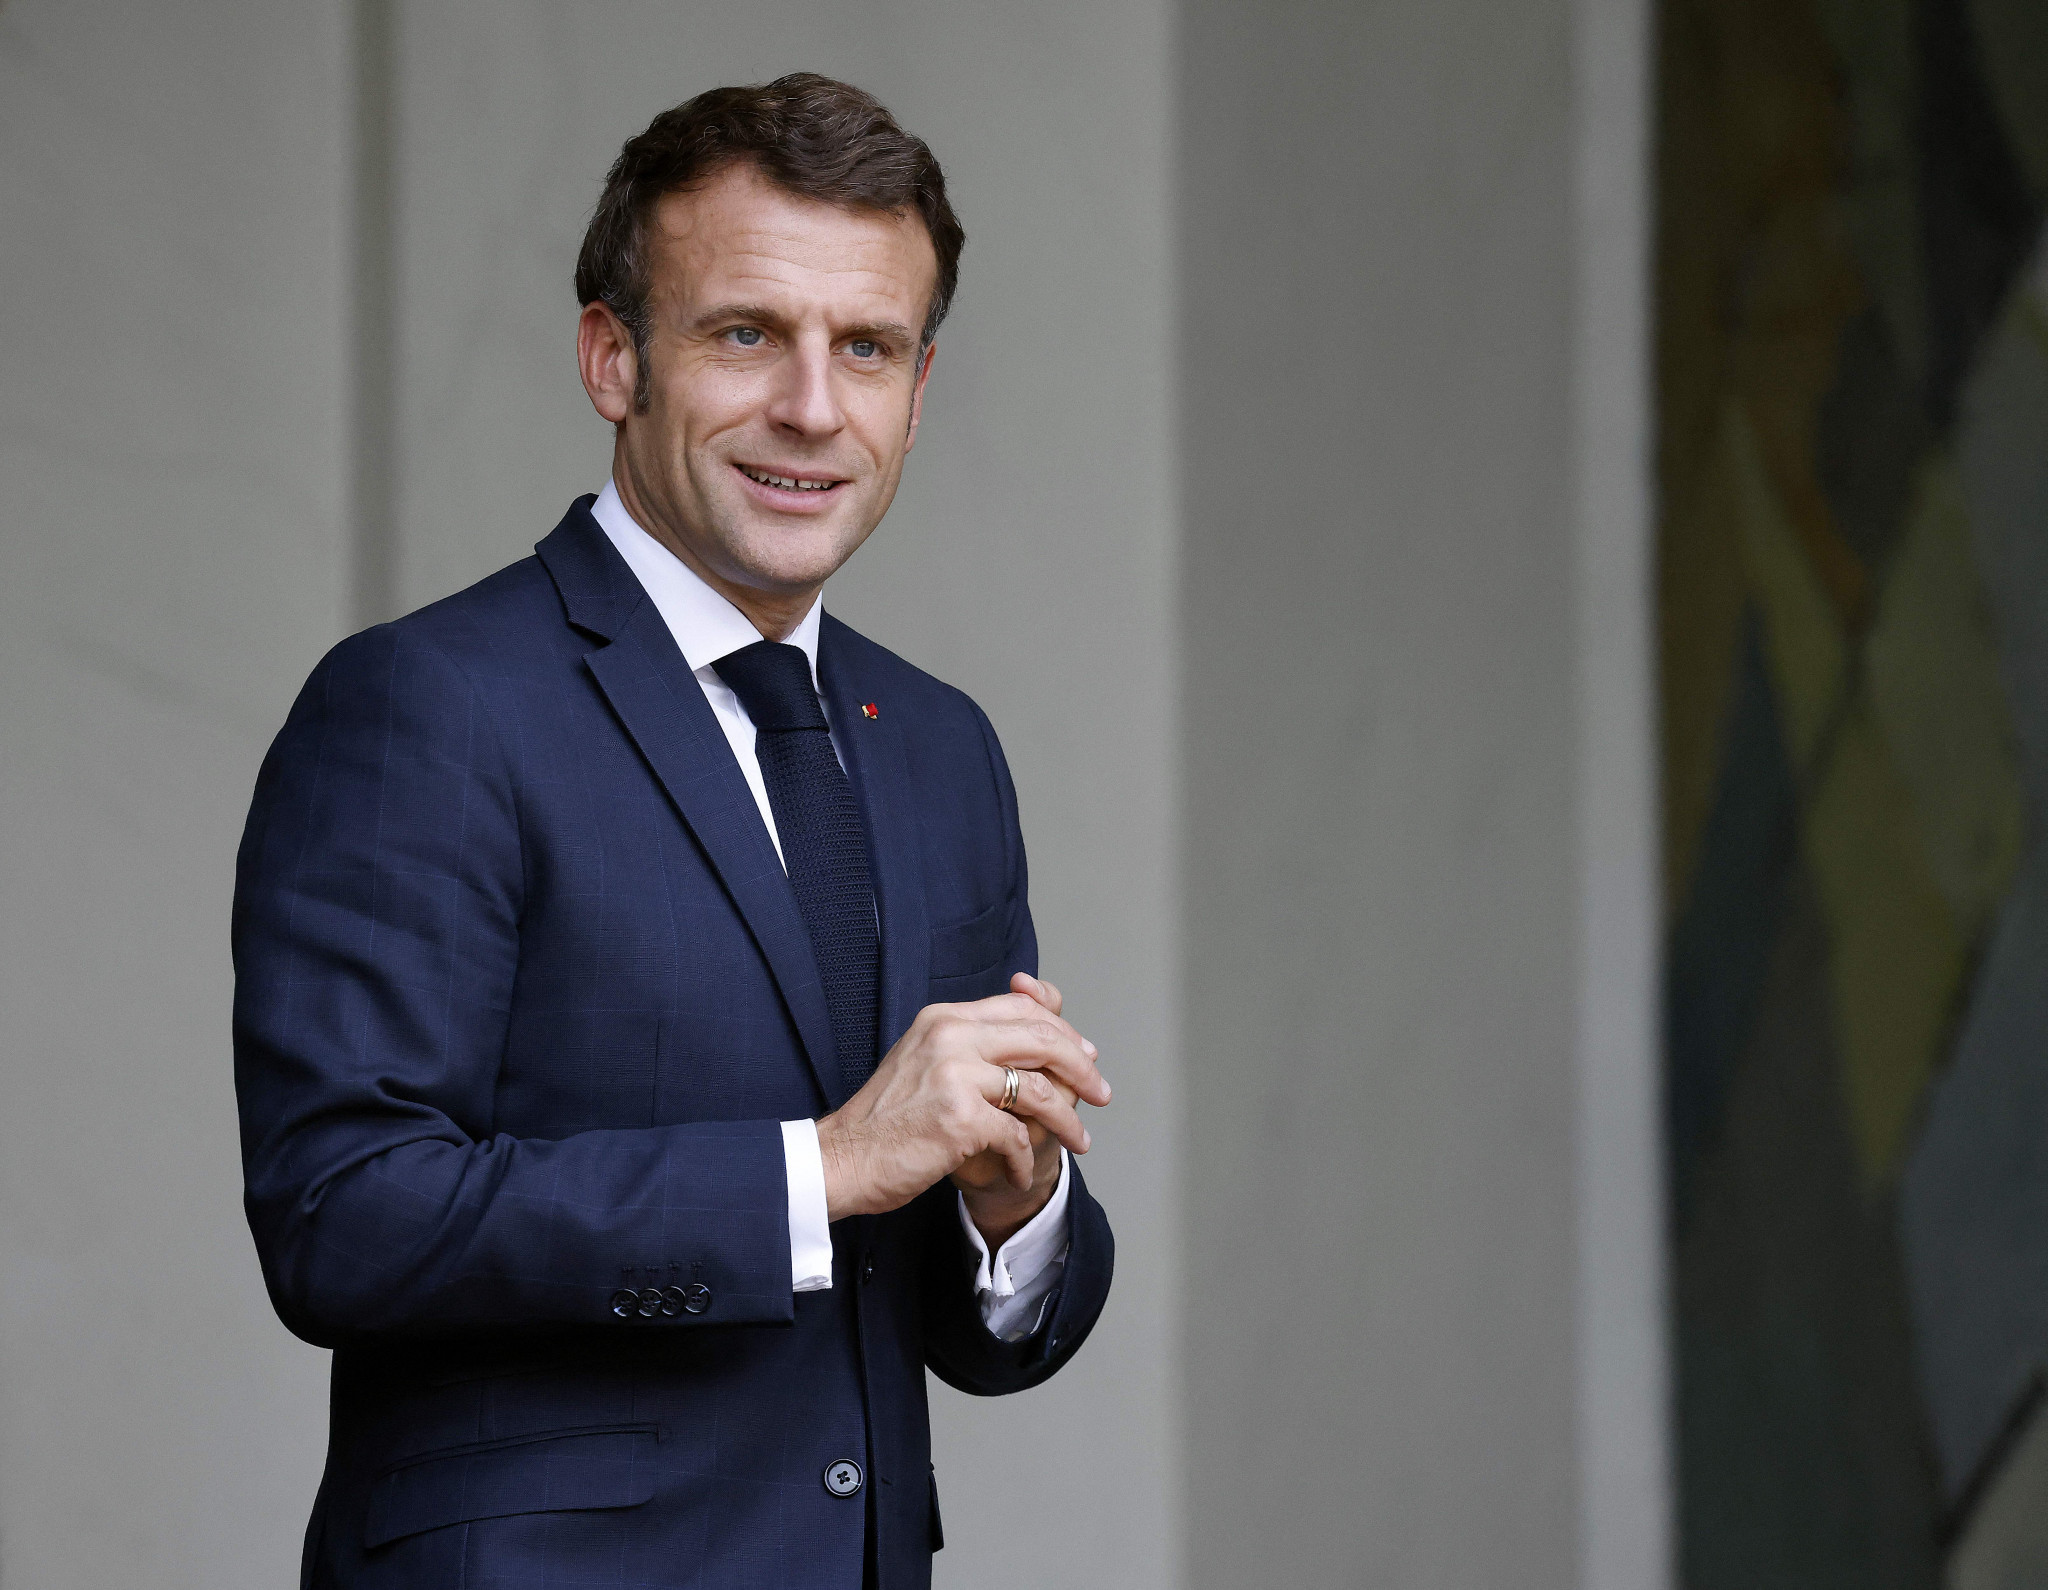 French President Emmanuel Macron's attendance at the FIFA World Cup is dependent on the success of his national team ©Getty Images